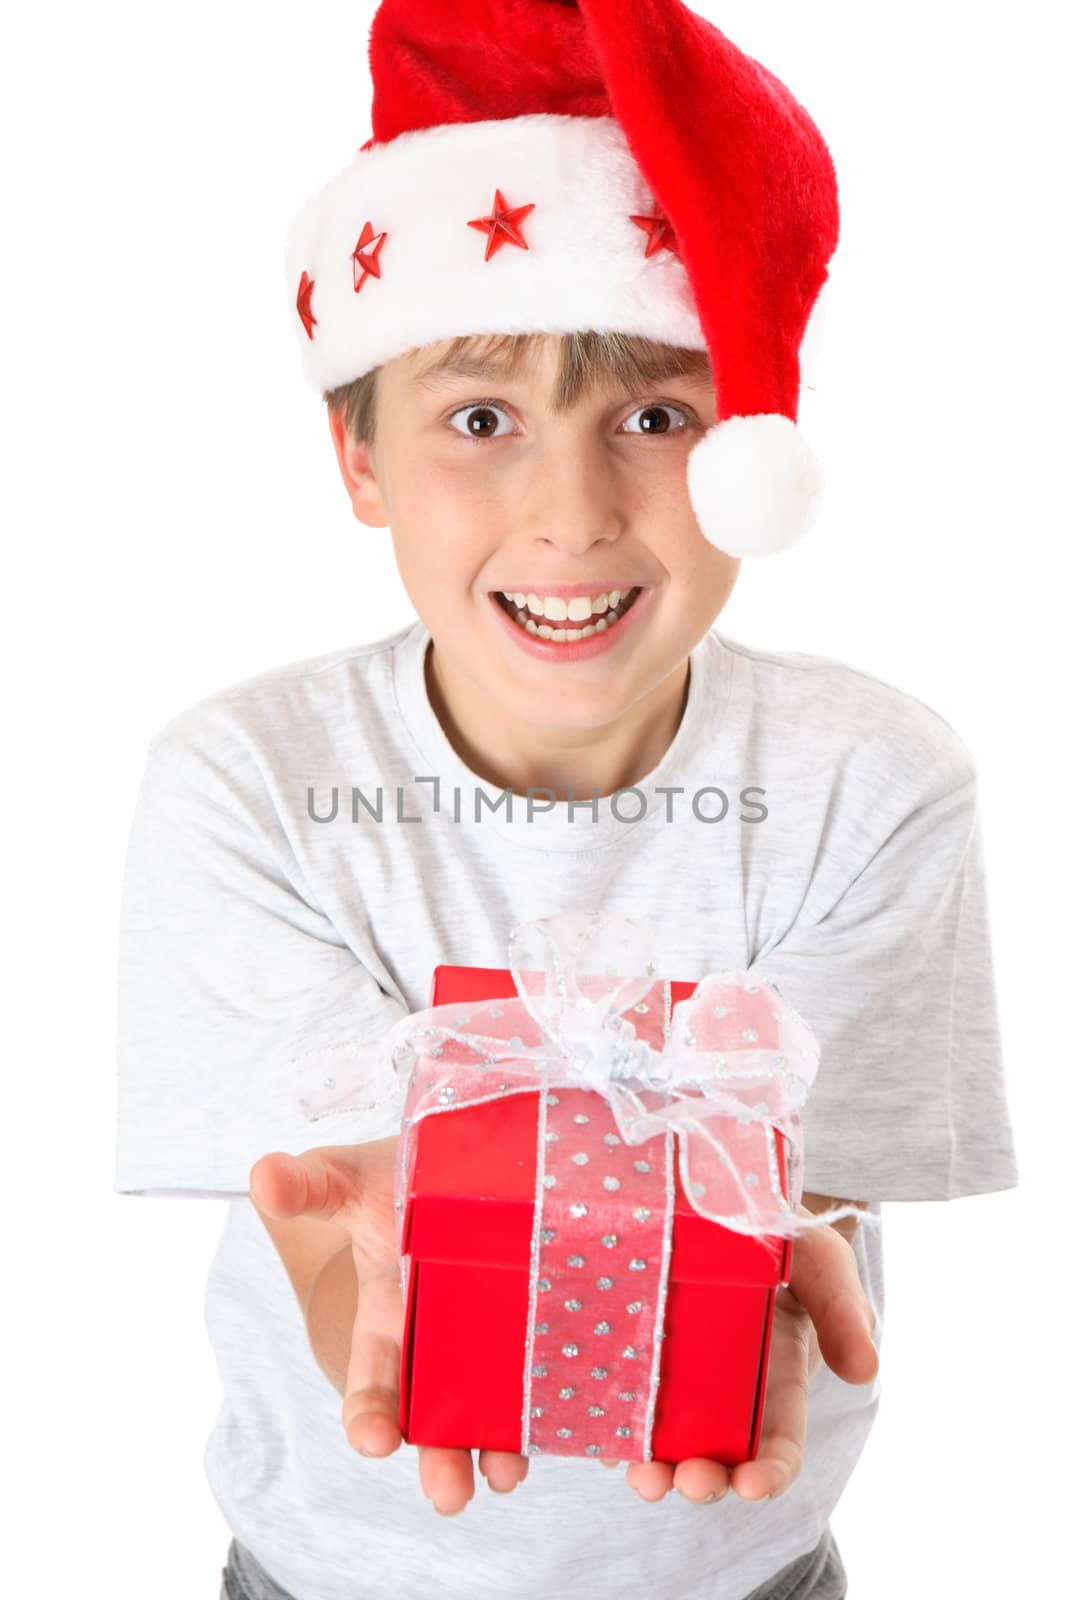 A festive child hands out a present at Christmas time.